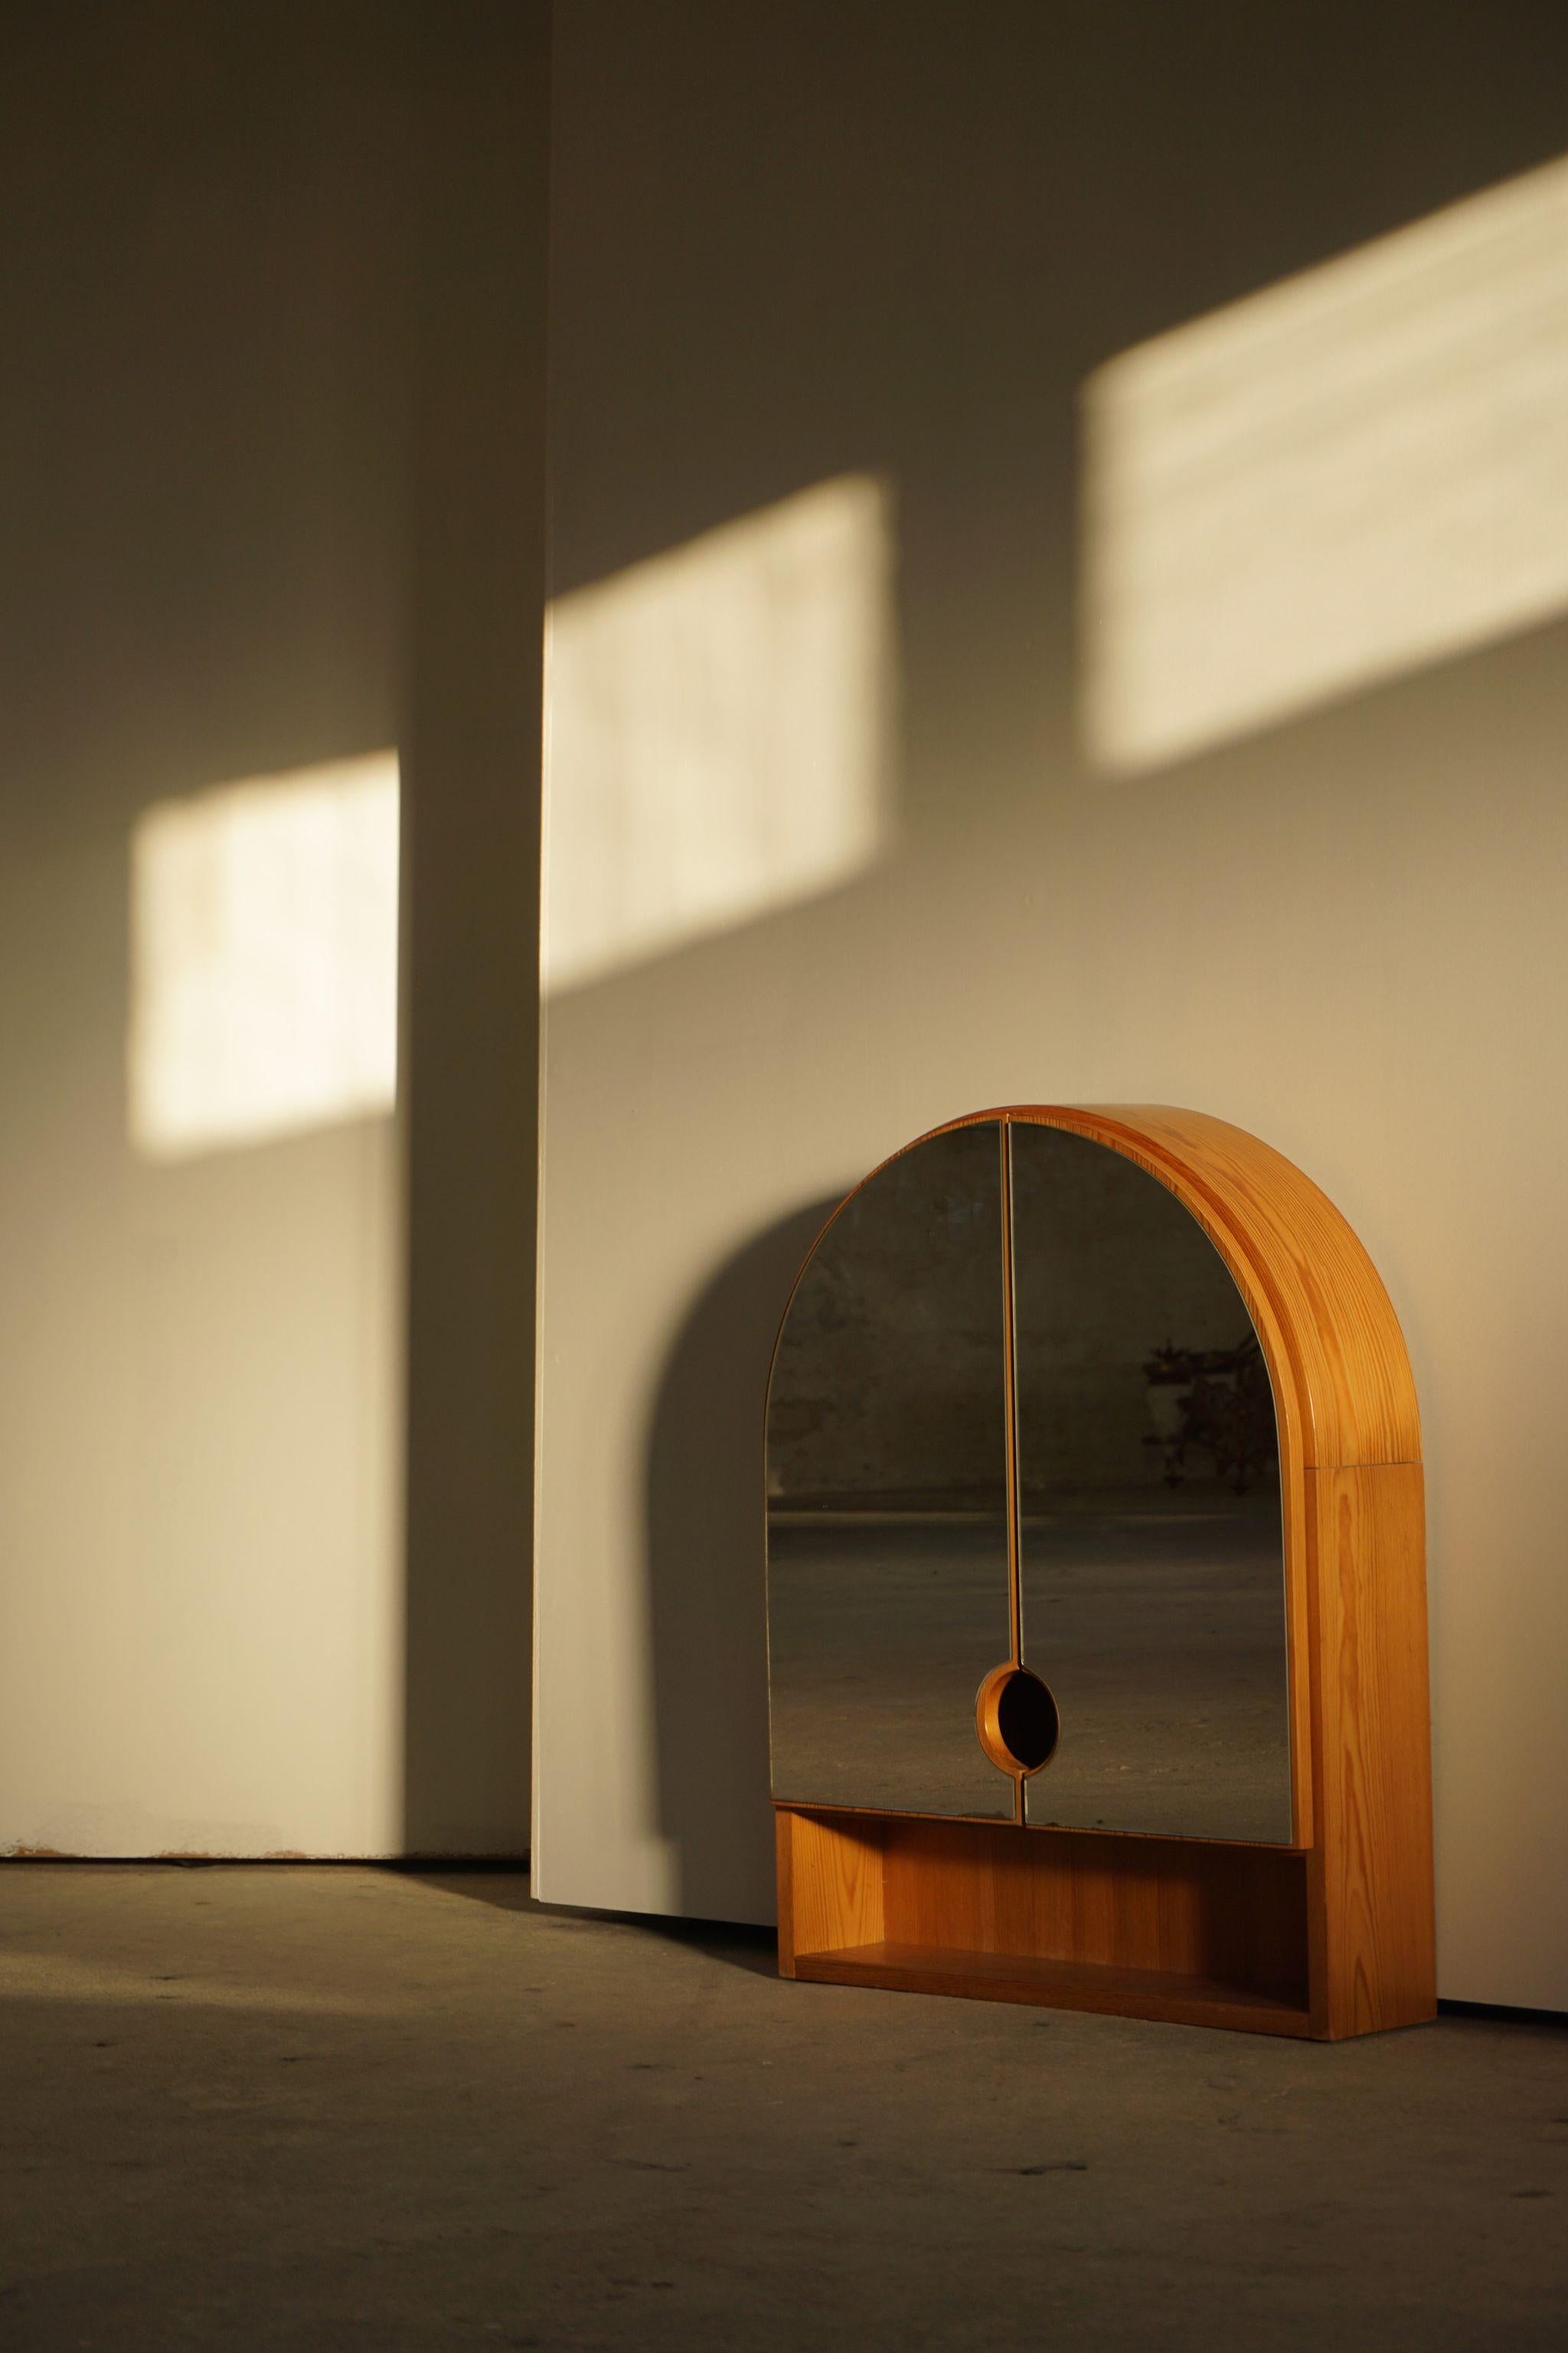 Decorative Swedish modern wall mirror in pine, suitable as bathroom mirror. Made by a unknown cabinetmaker.

Honorable mentions in similar style include Roland Wilhelmsson, Pierre Chapo, and Axel Einar Hjorth.